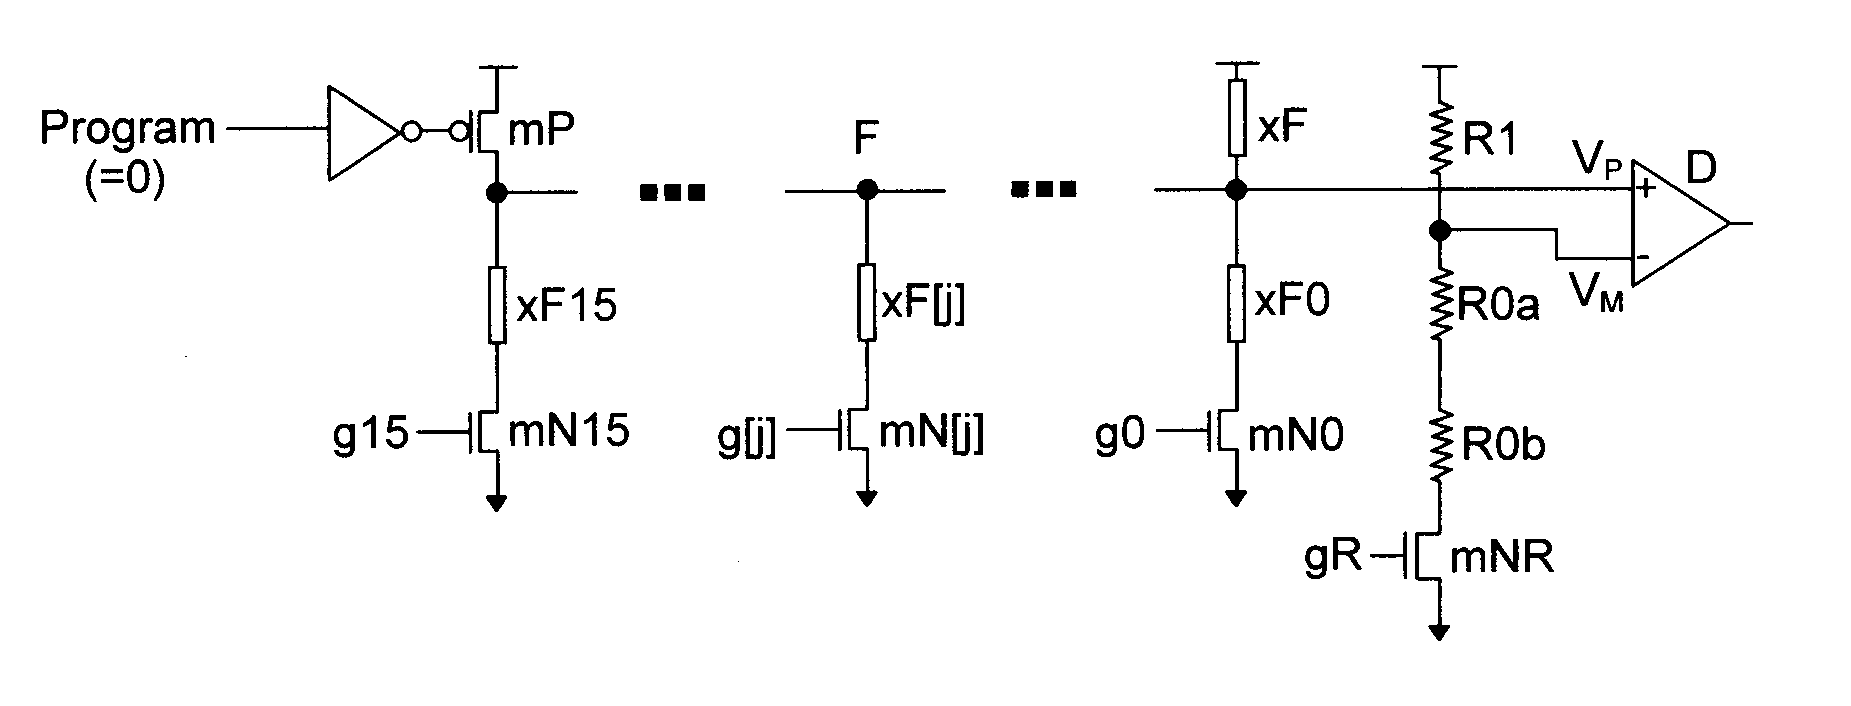 Low voltage programmable eFuse with differential sensing scheme